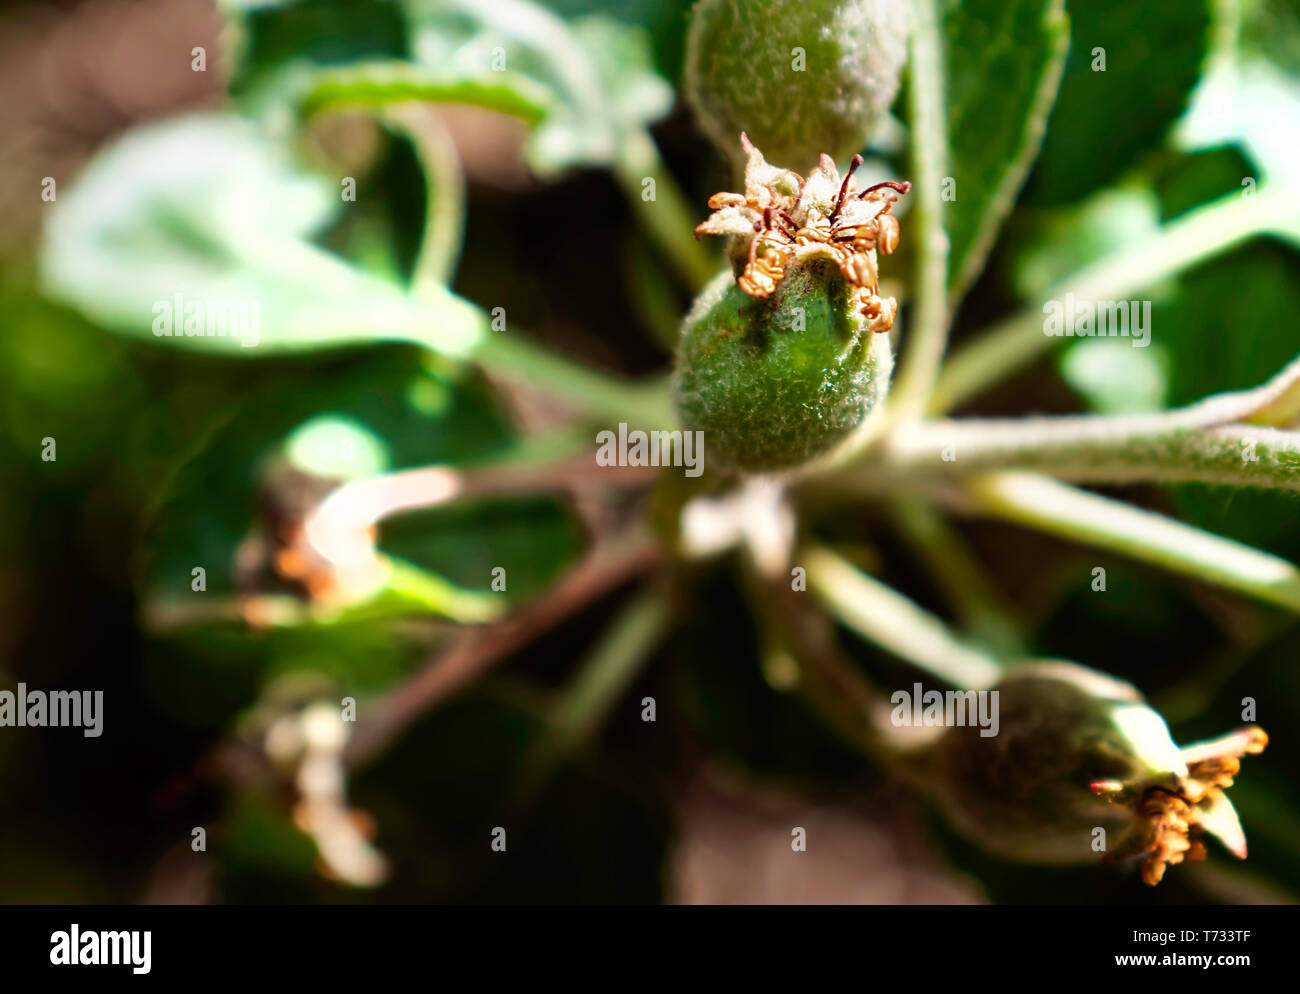 Nice macro closeup of flower bud showing trichomes, stamen, and ovaries Stock Photo